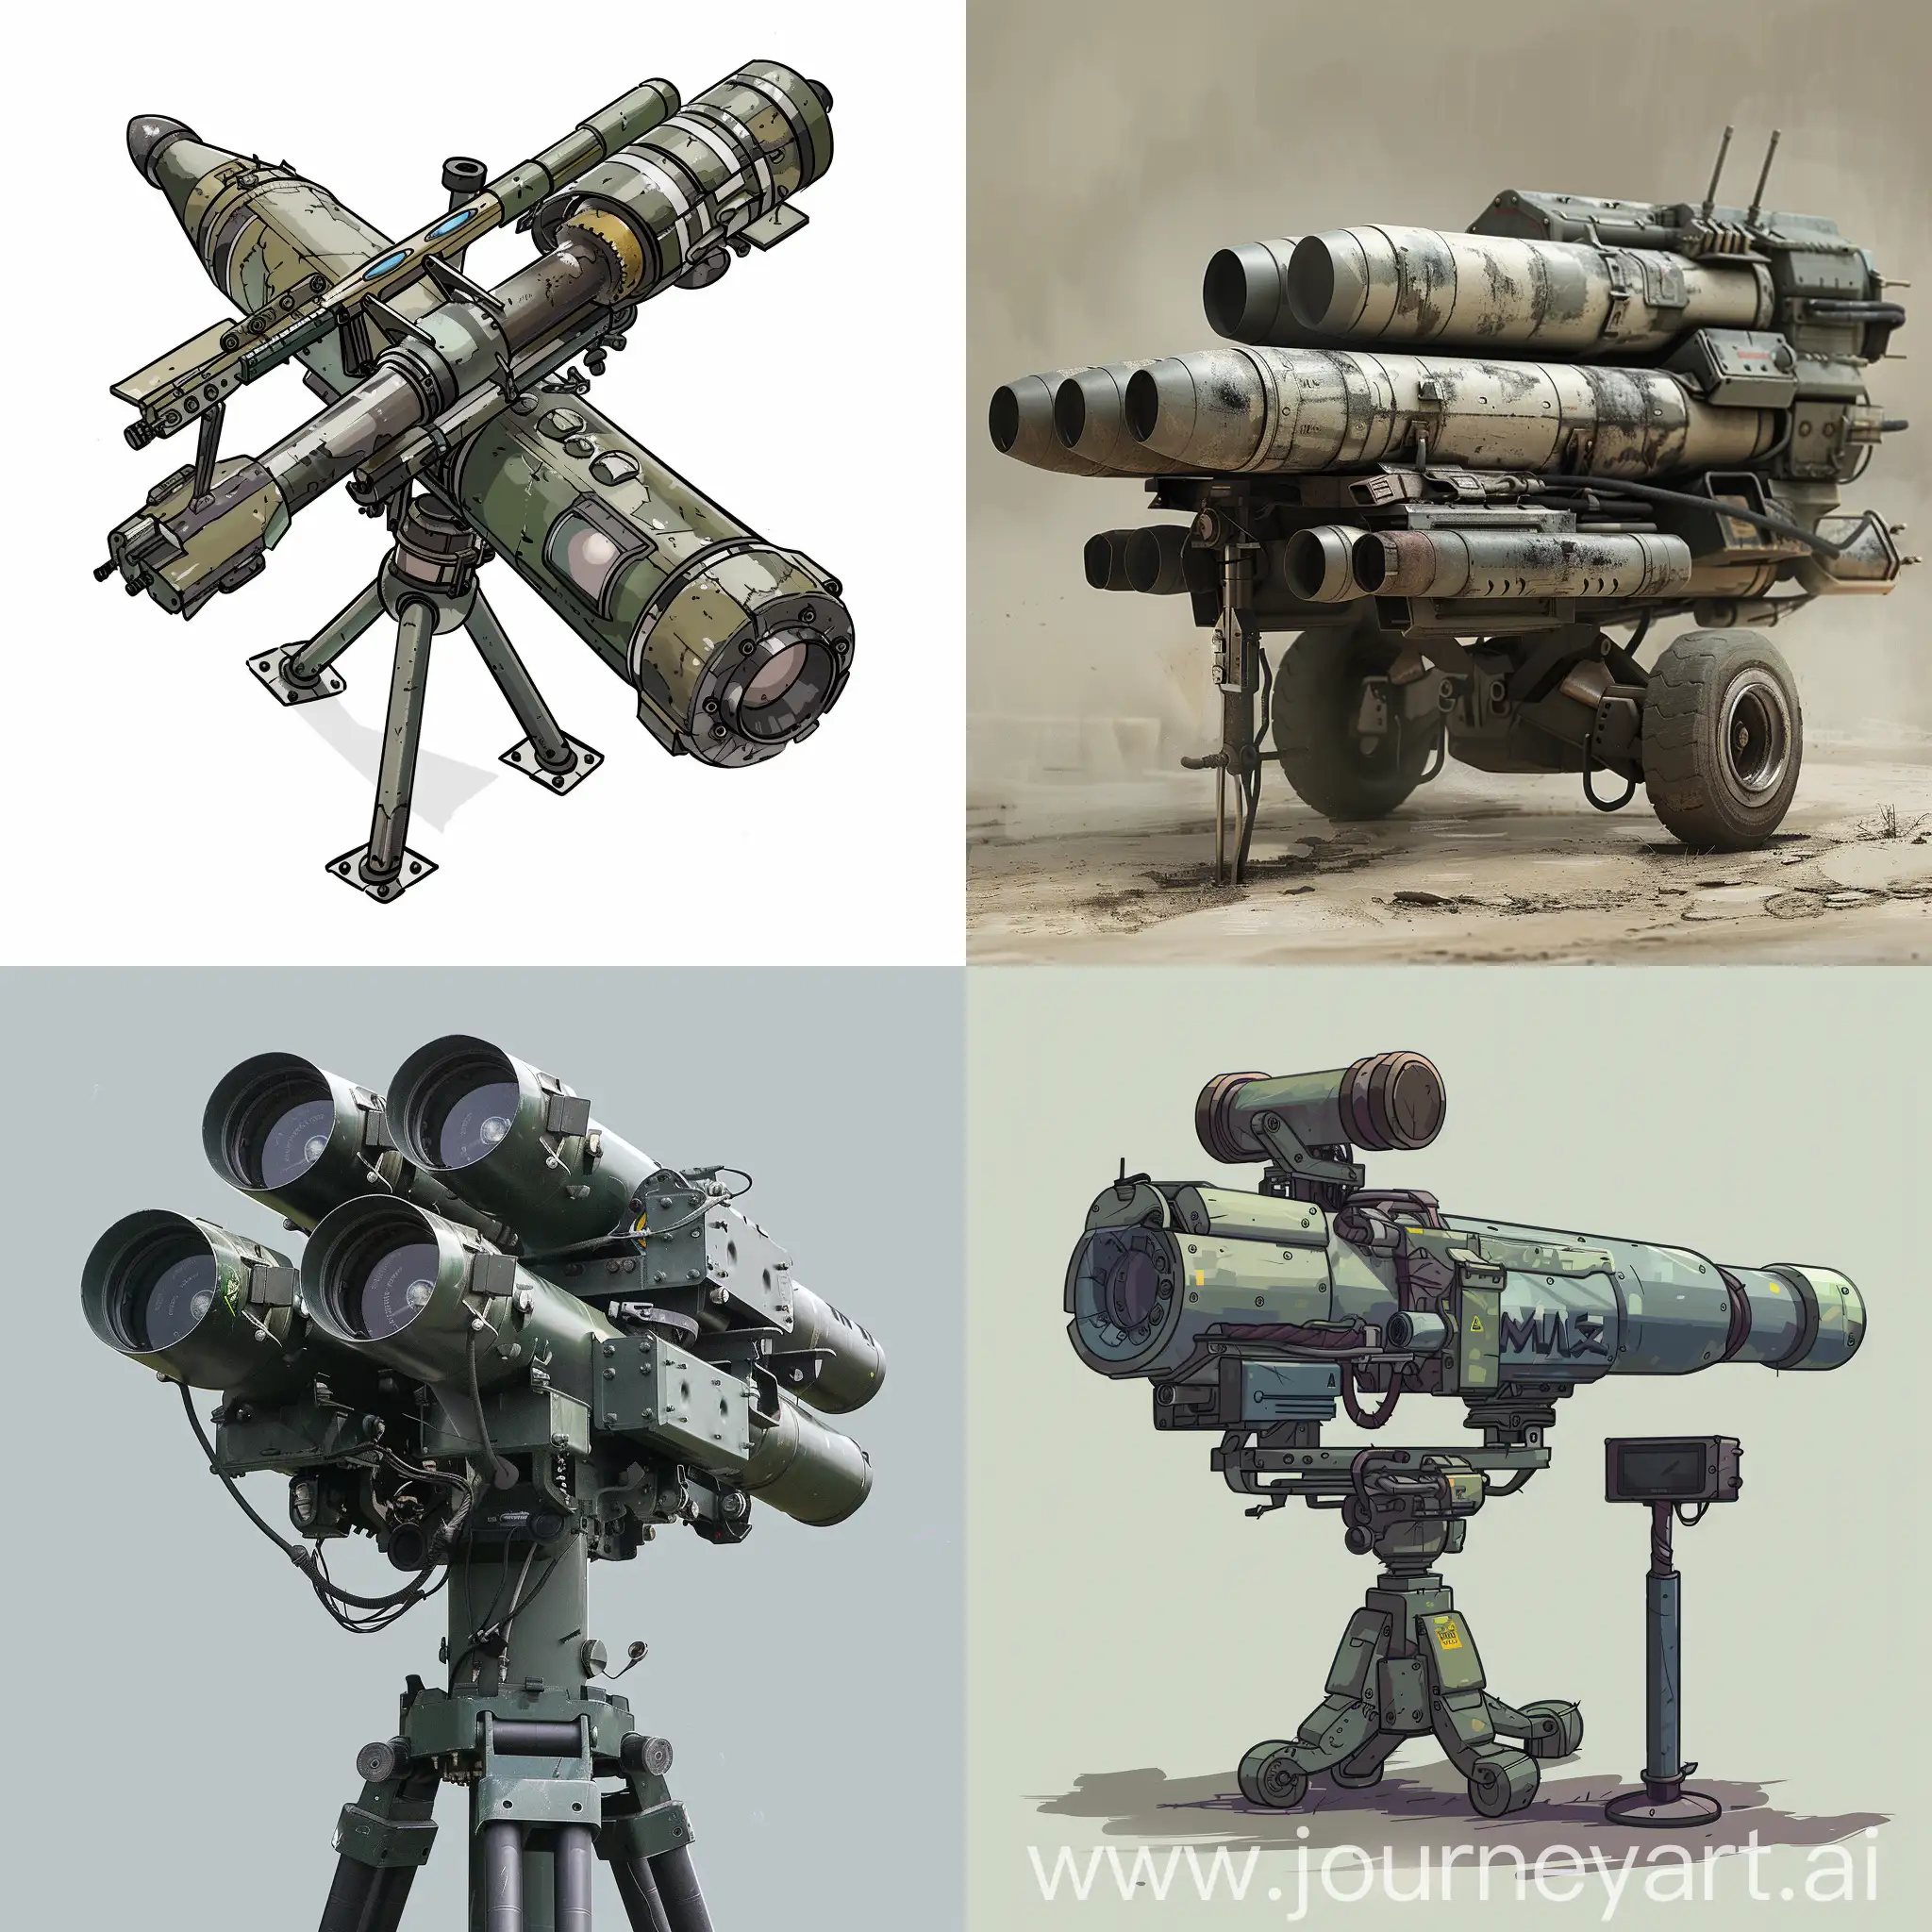 Portable-AntiAircraft-Missile-System-MANPADS-with-Missile-Weapon